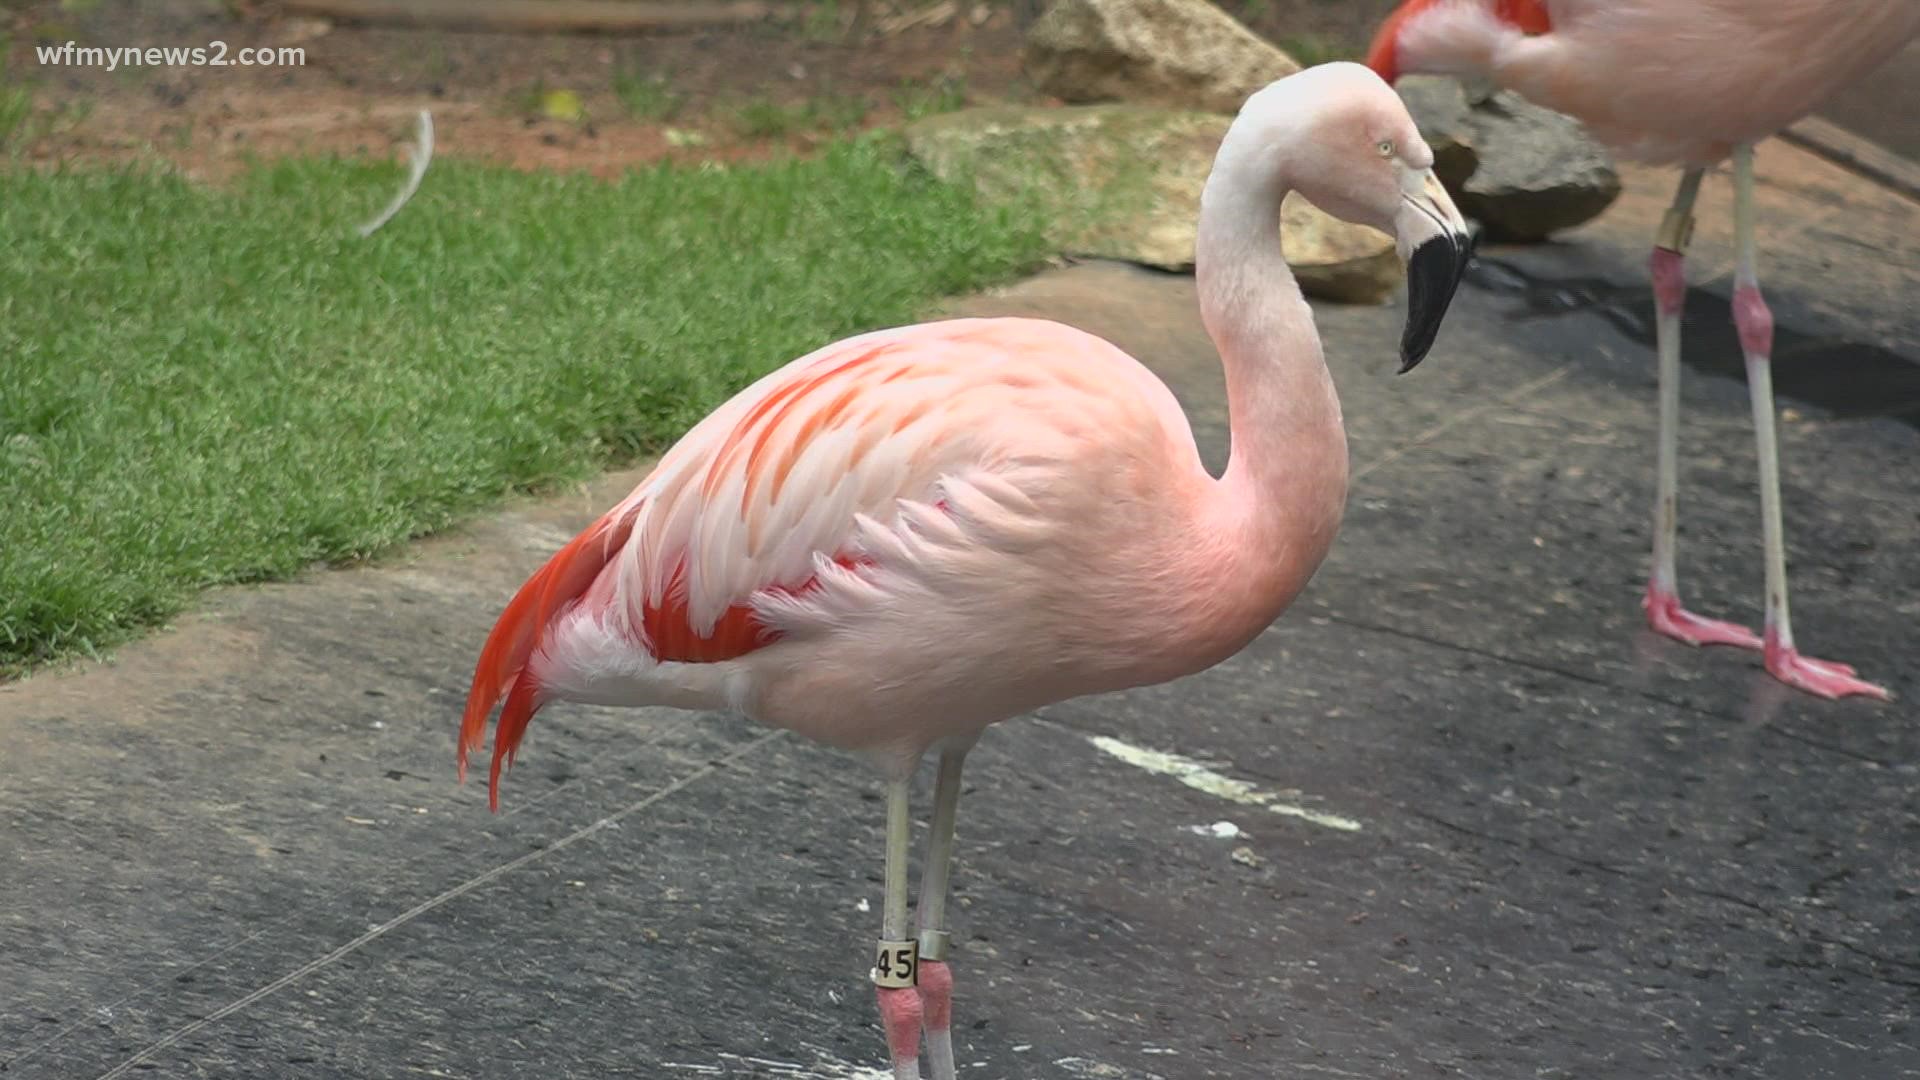 The aviary had been a part of the North Carolina Zoo for 40 years.